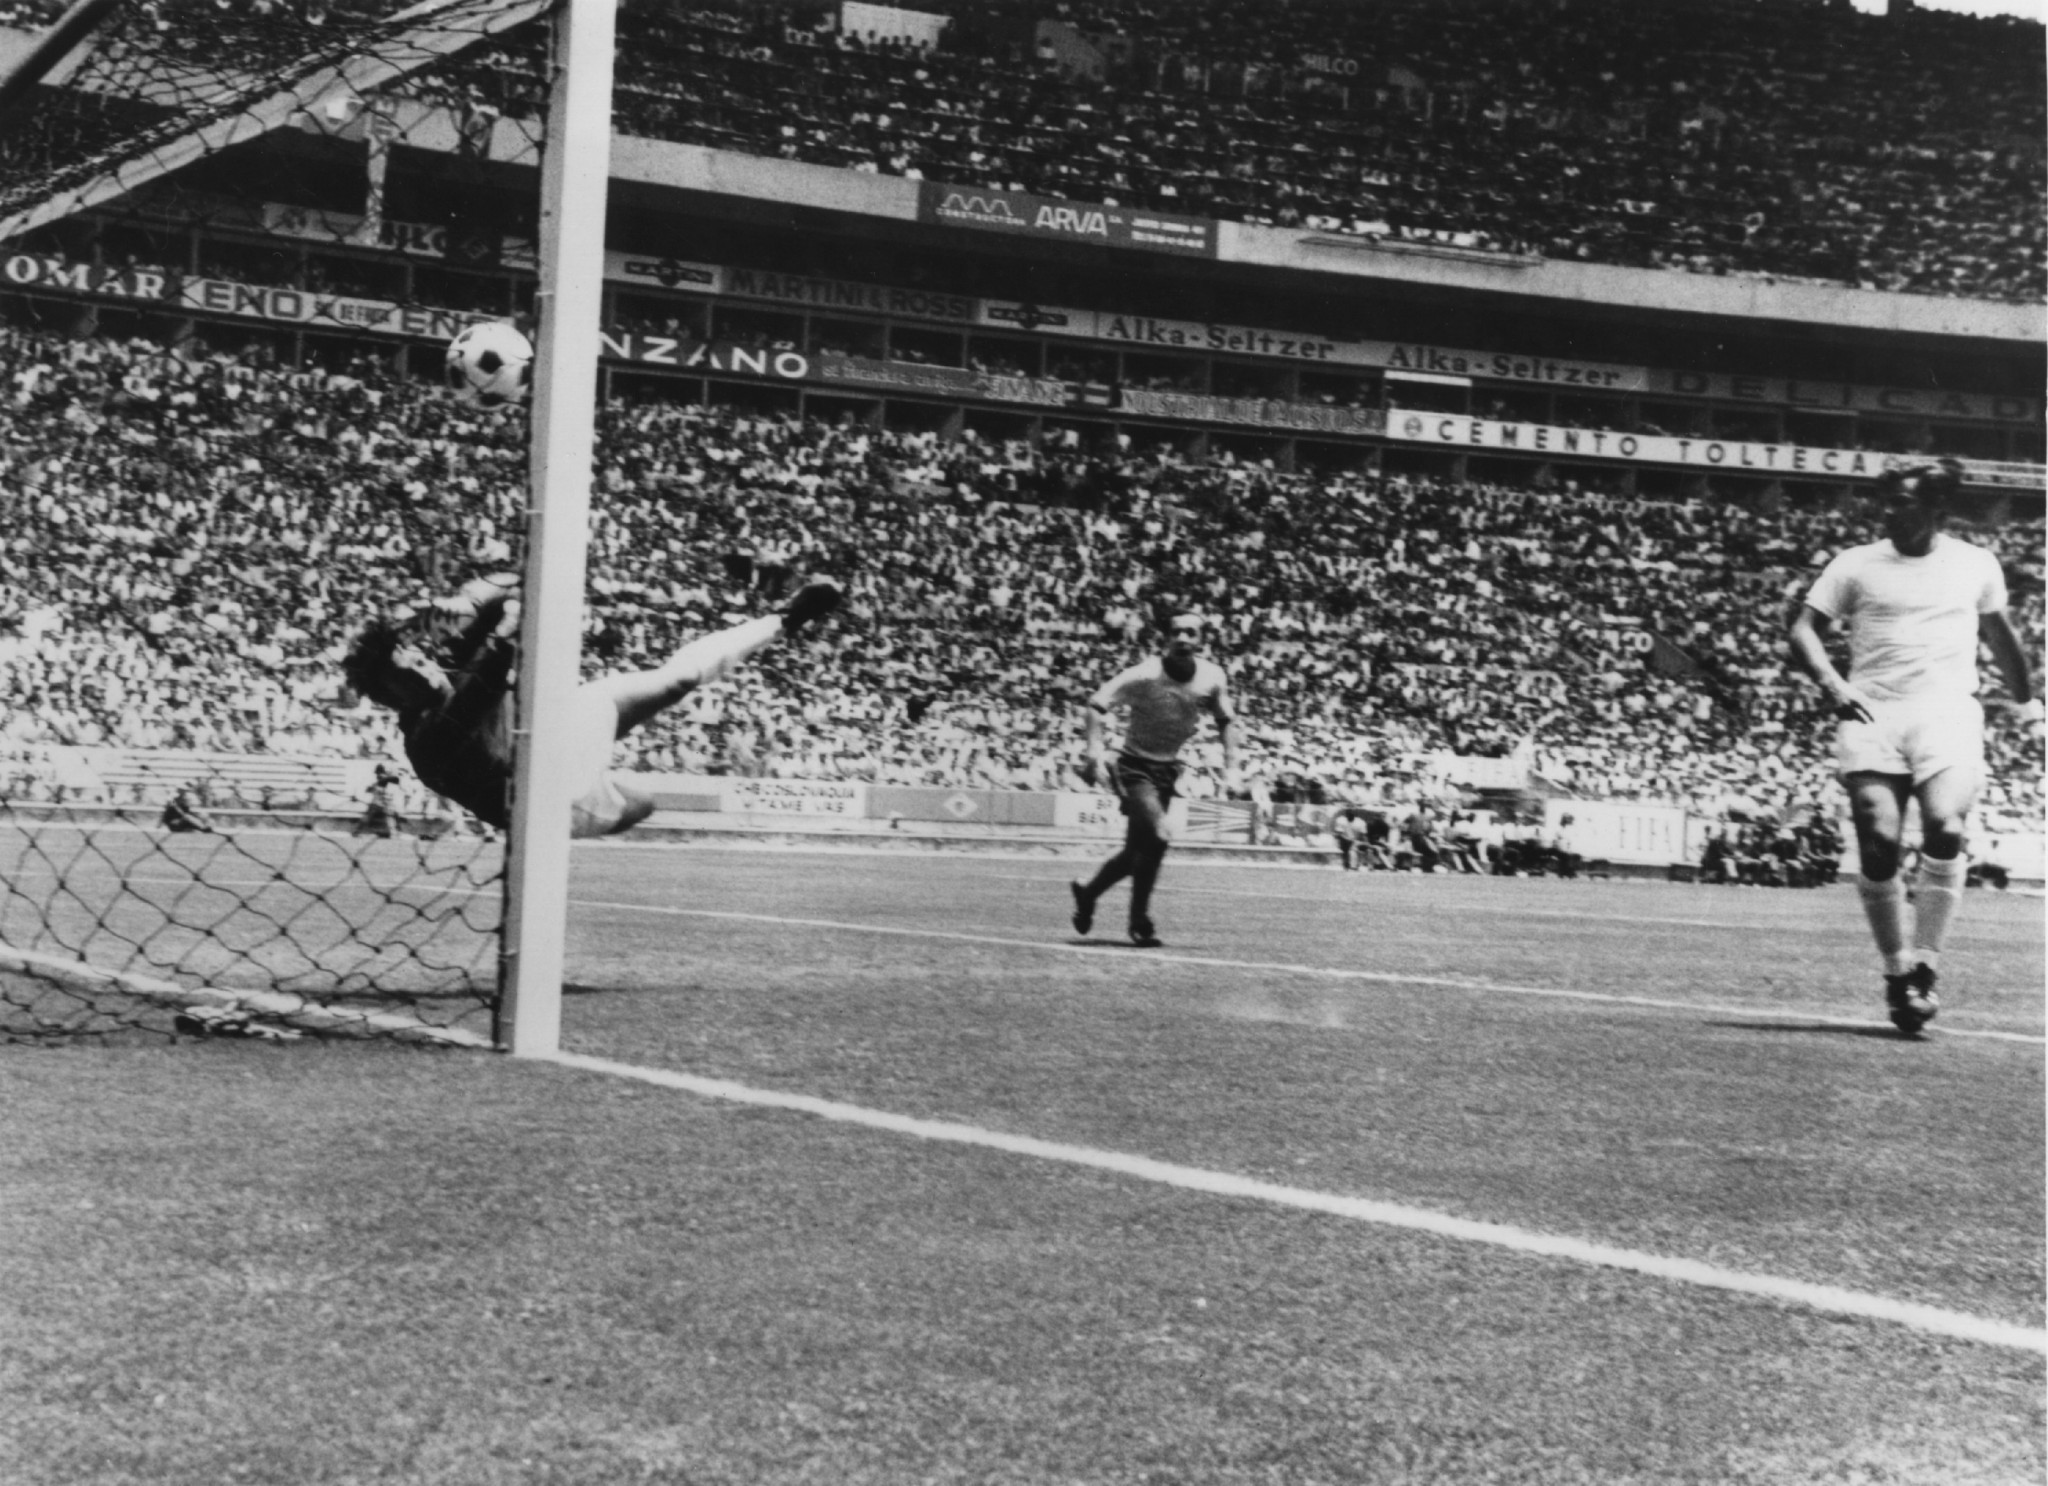 Gordan Banks made what is viewed as one of the greatest saves of all time at the tournament, denying Pelé ©Getty Images